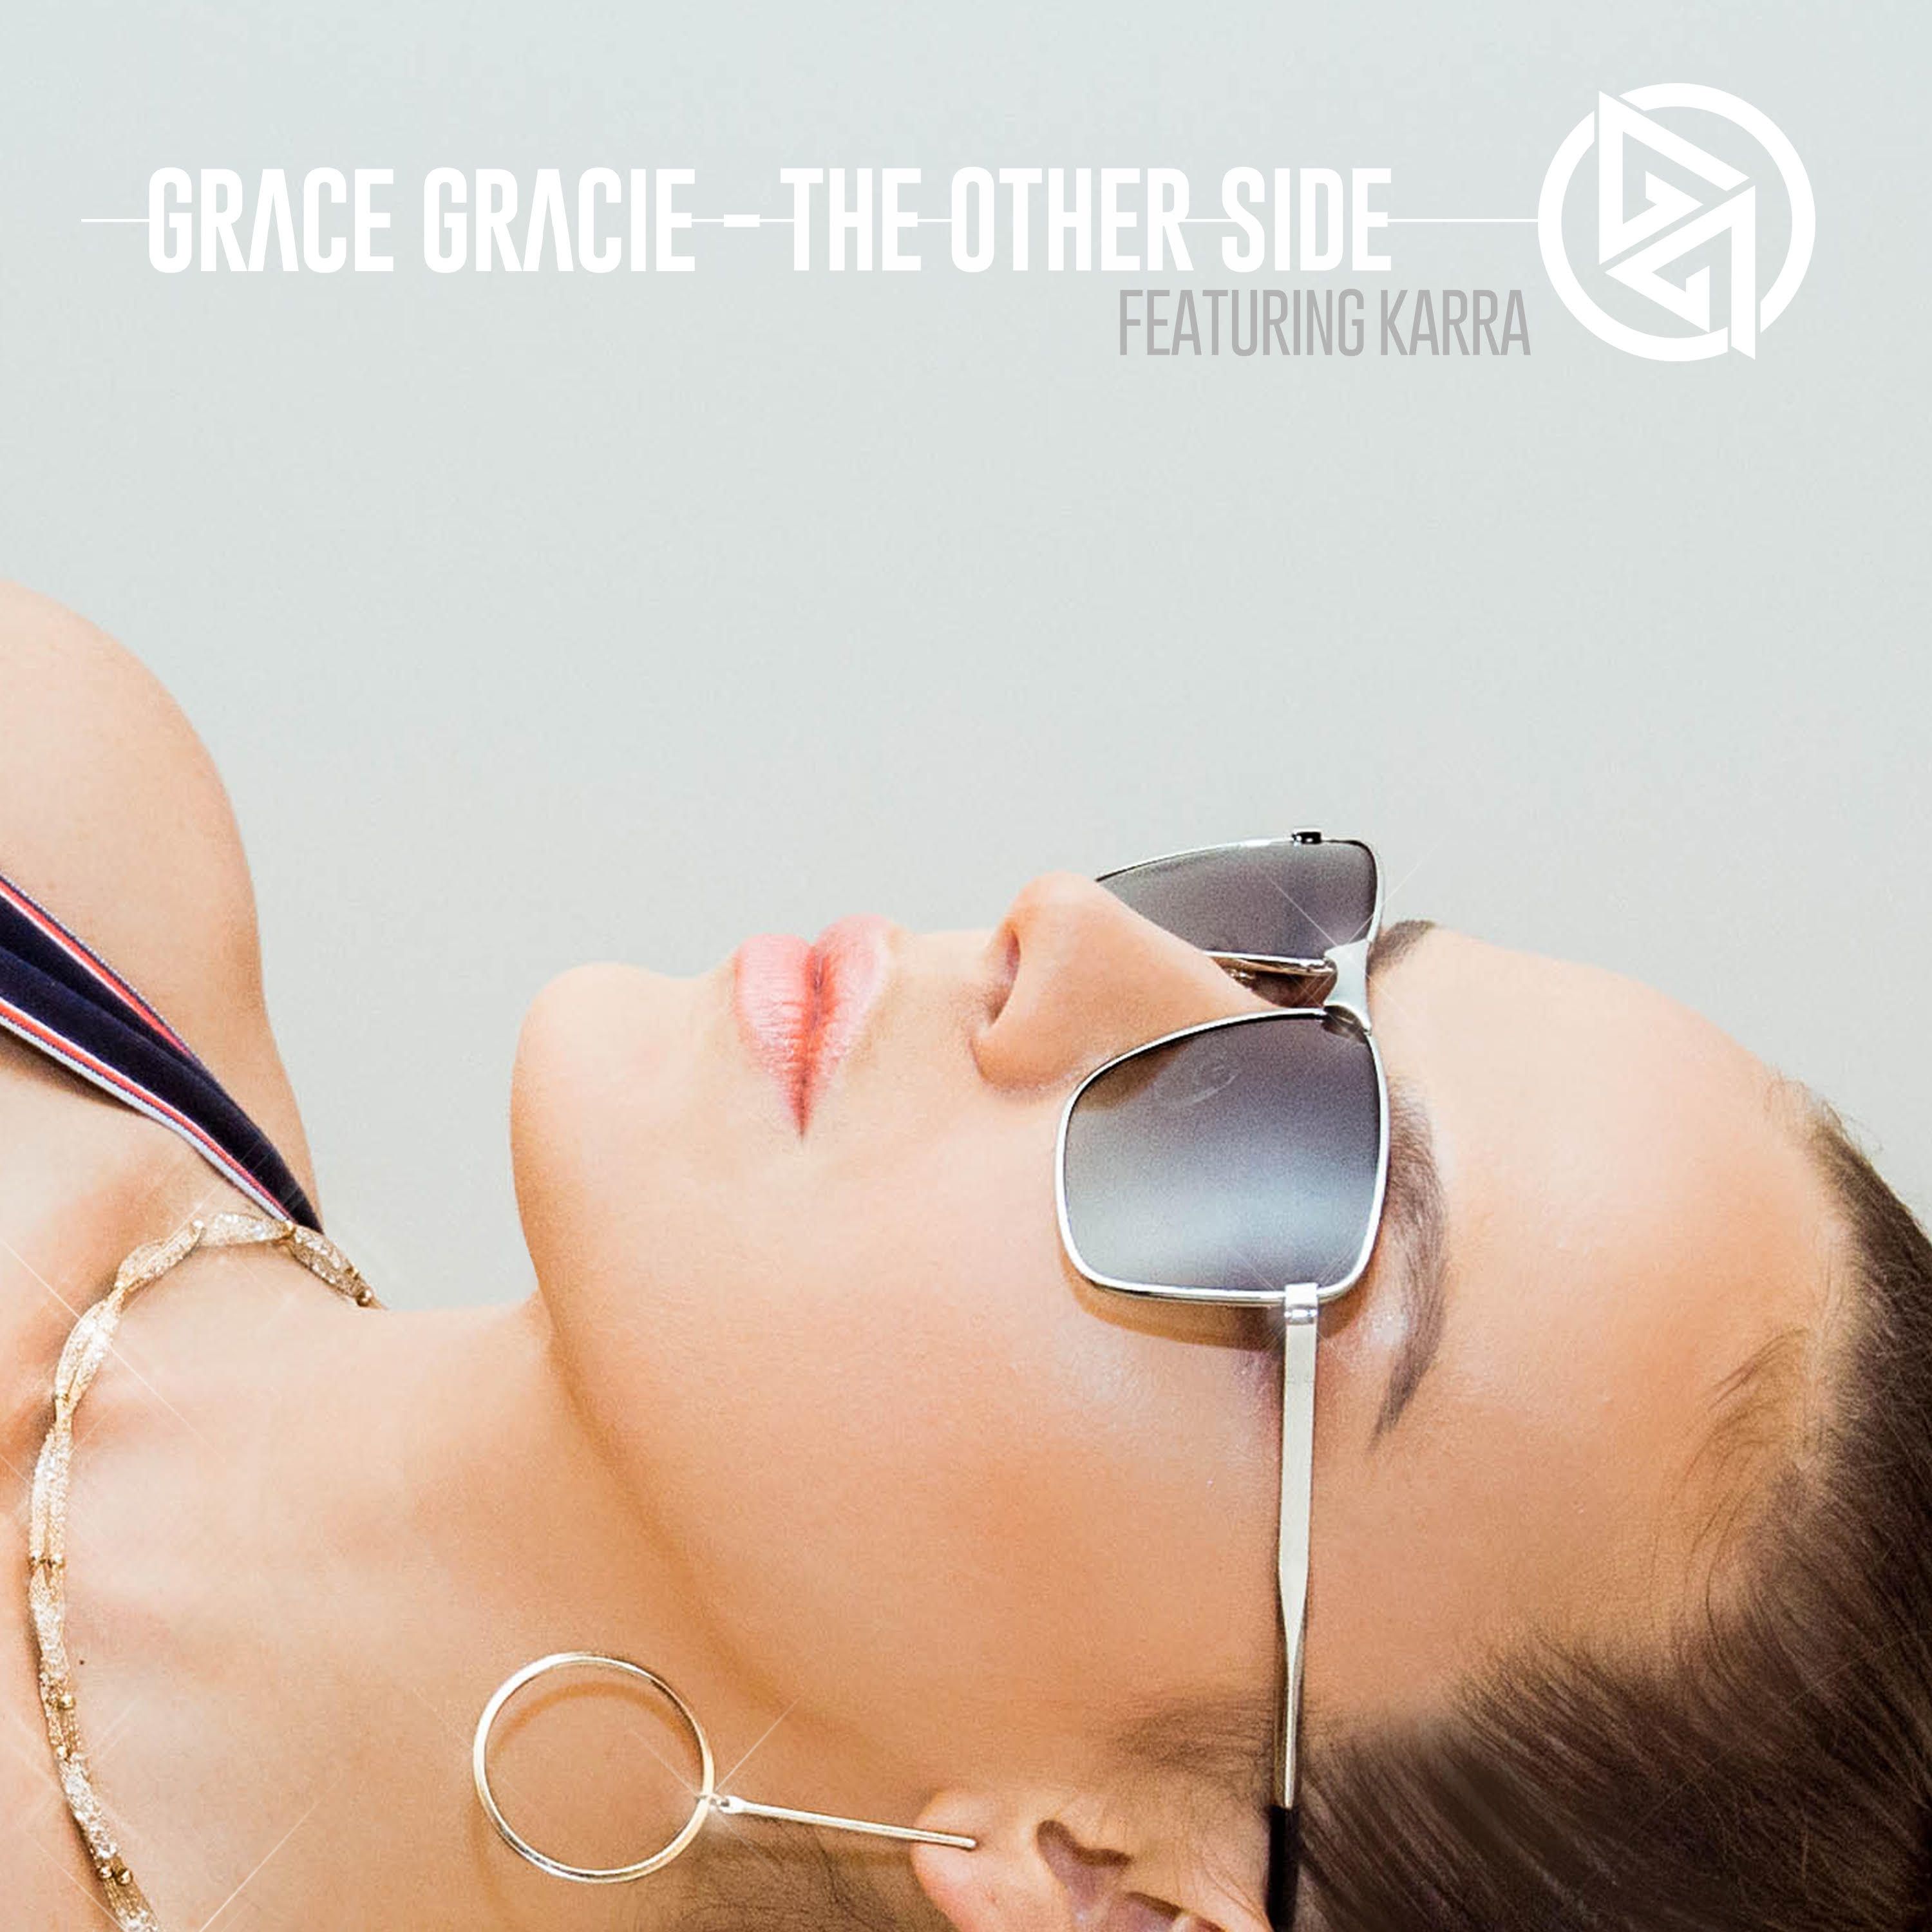 Grace Gracie Releases Explosive Dance Music Track The Other Side